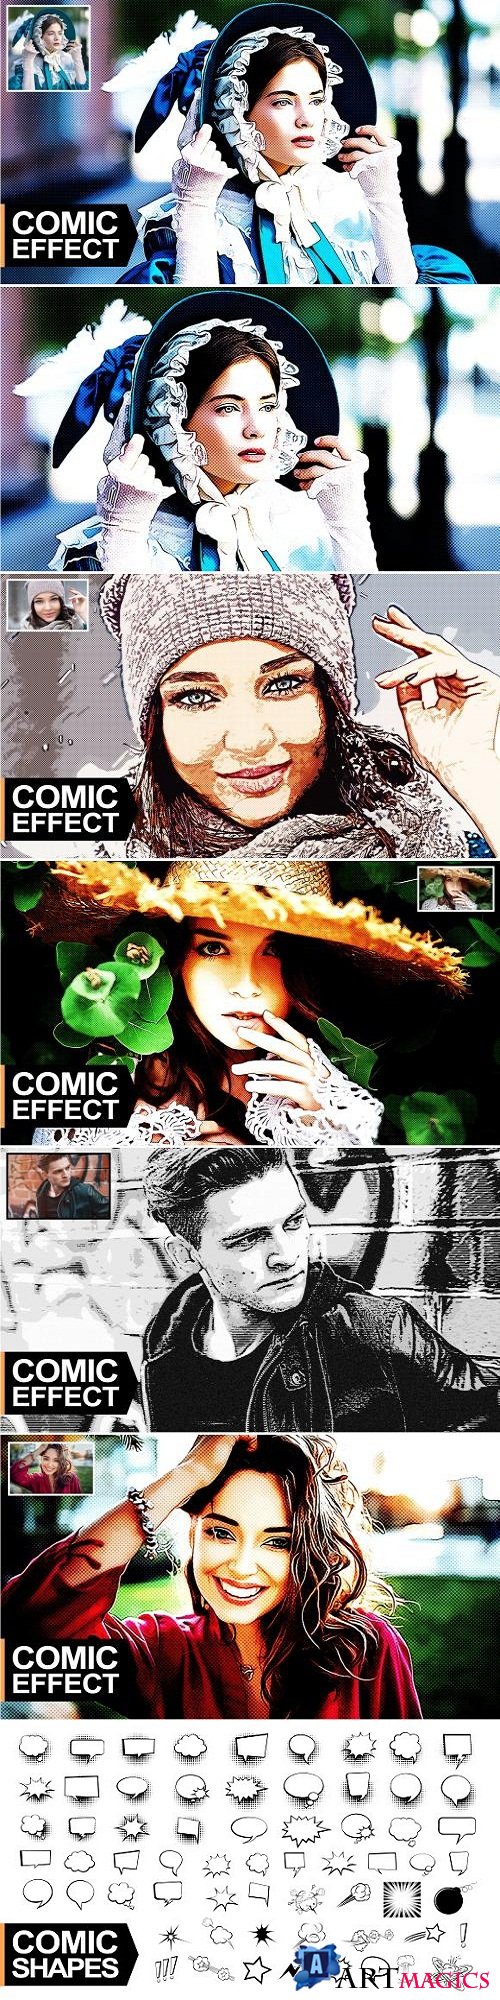 Comic Effect PS Action - 3217043